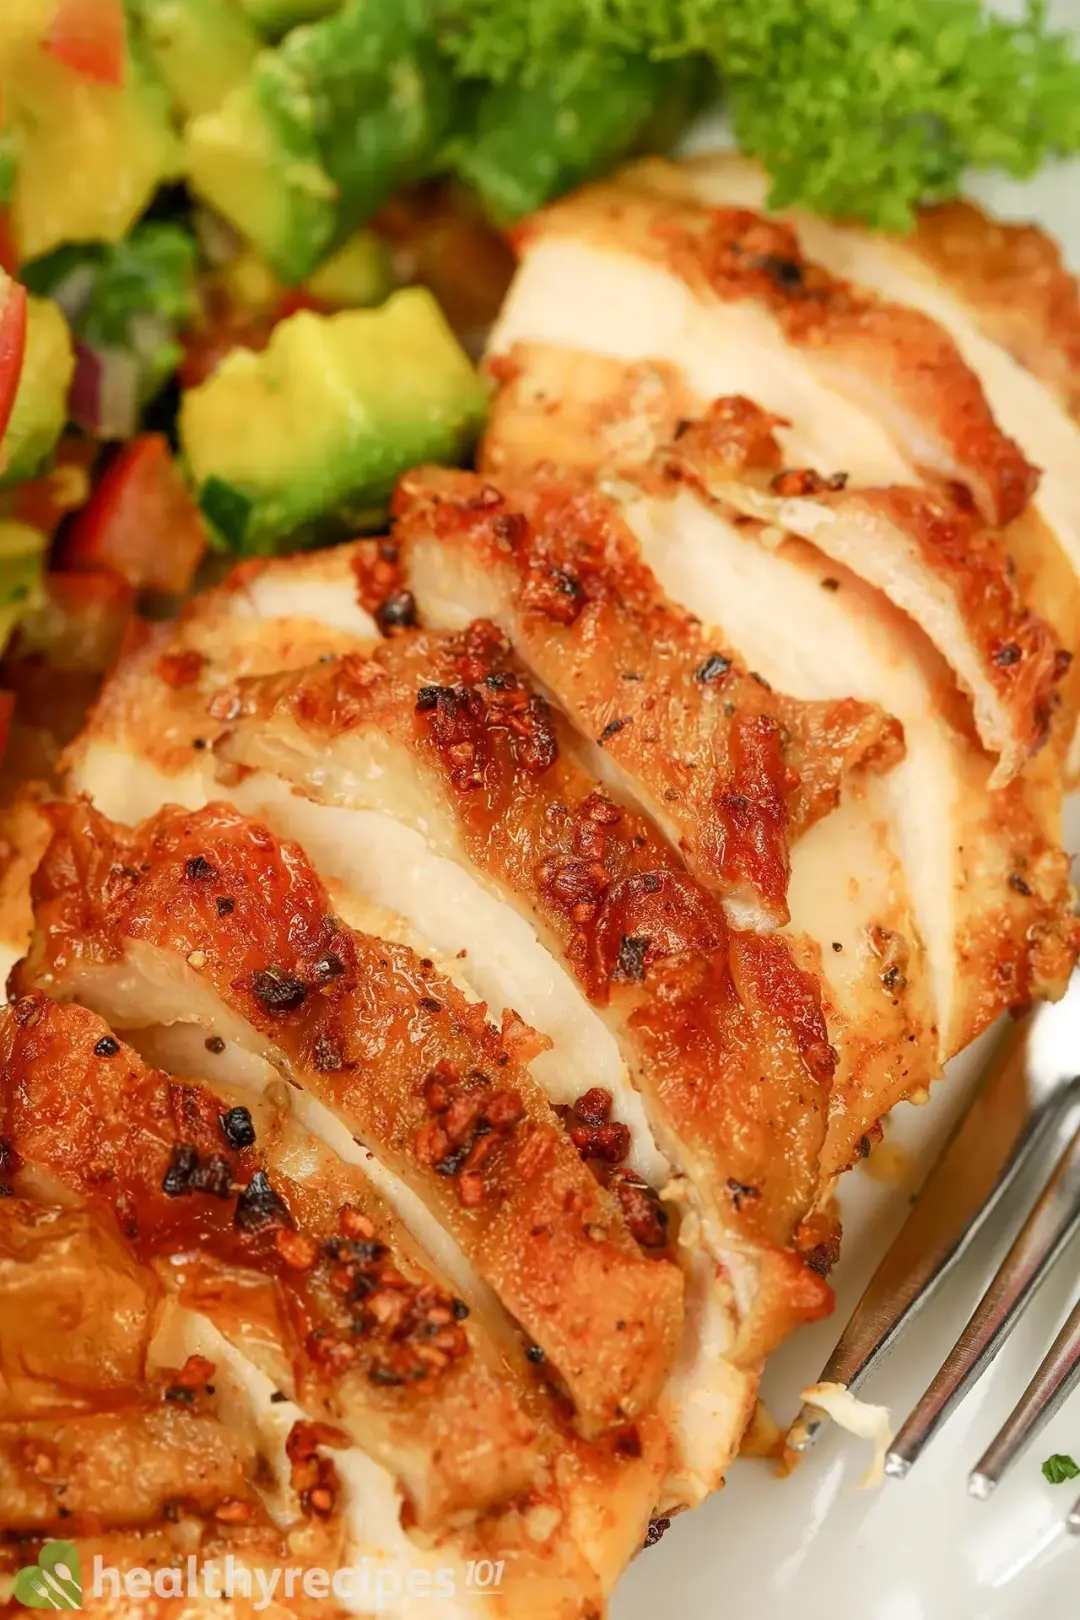 Is Chicken With Avocado Salsa Healthy